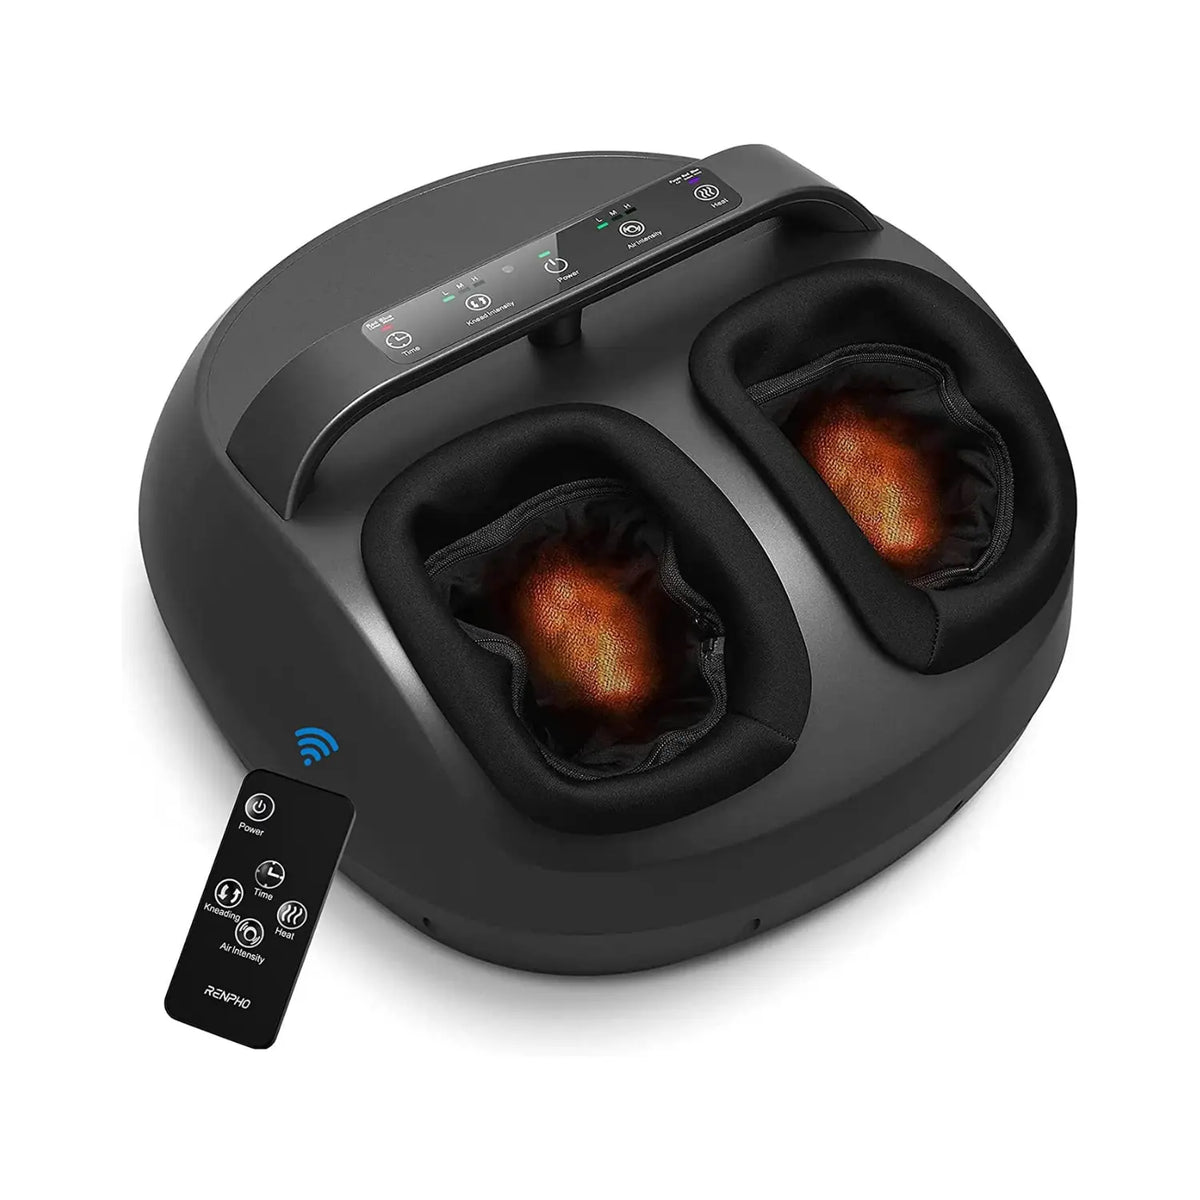 A Renpho EU Shiatsu Foot Massager with Handle, with two deep slots for feet, featuring a control panel with multiple settings on the top surface. Equipped with shiatsu kneading, it offers an exceptional foot massage experience. The device includes a wireless remote with various icons and buttons for easy adjustments, and the inside of the slots are illuminated.